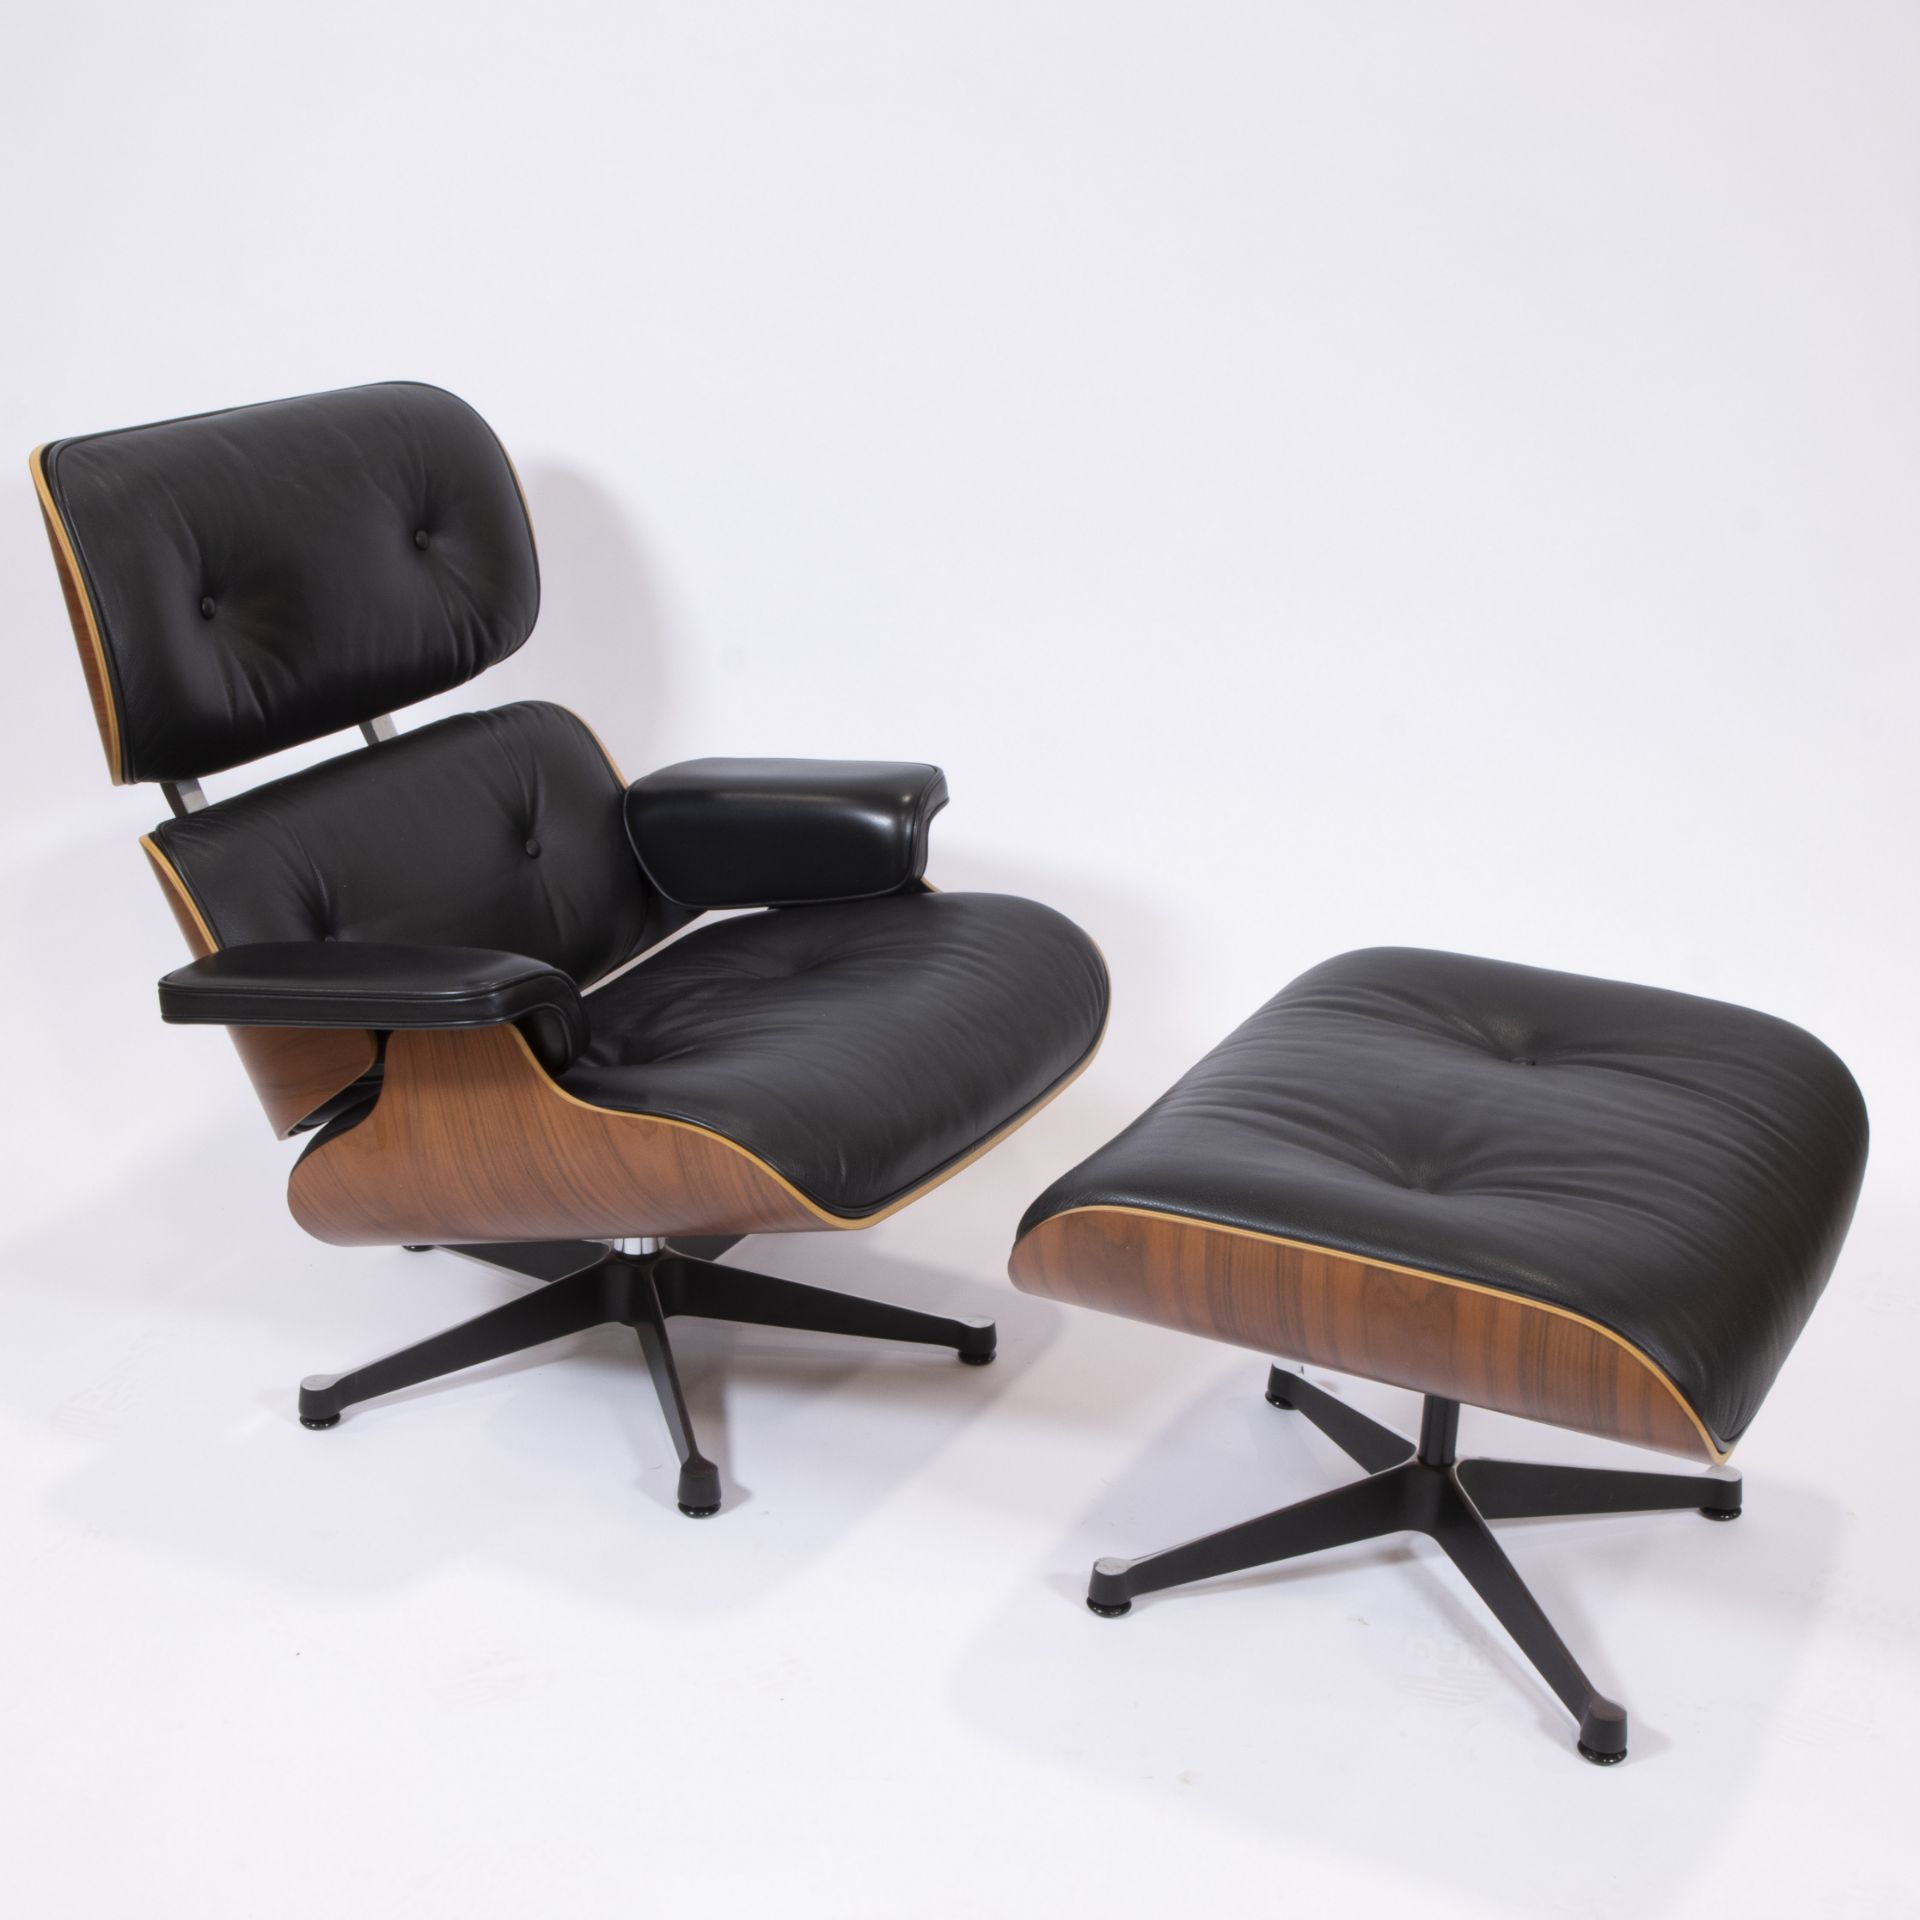 Original Charles Eames lounge chair and footstool for Vitra, marked